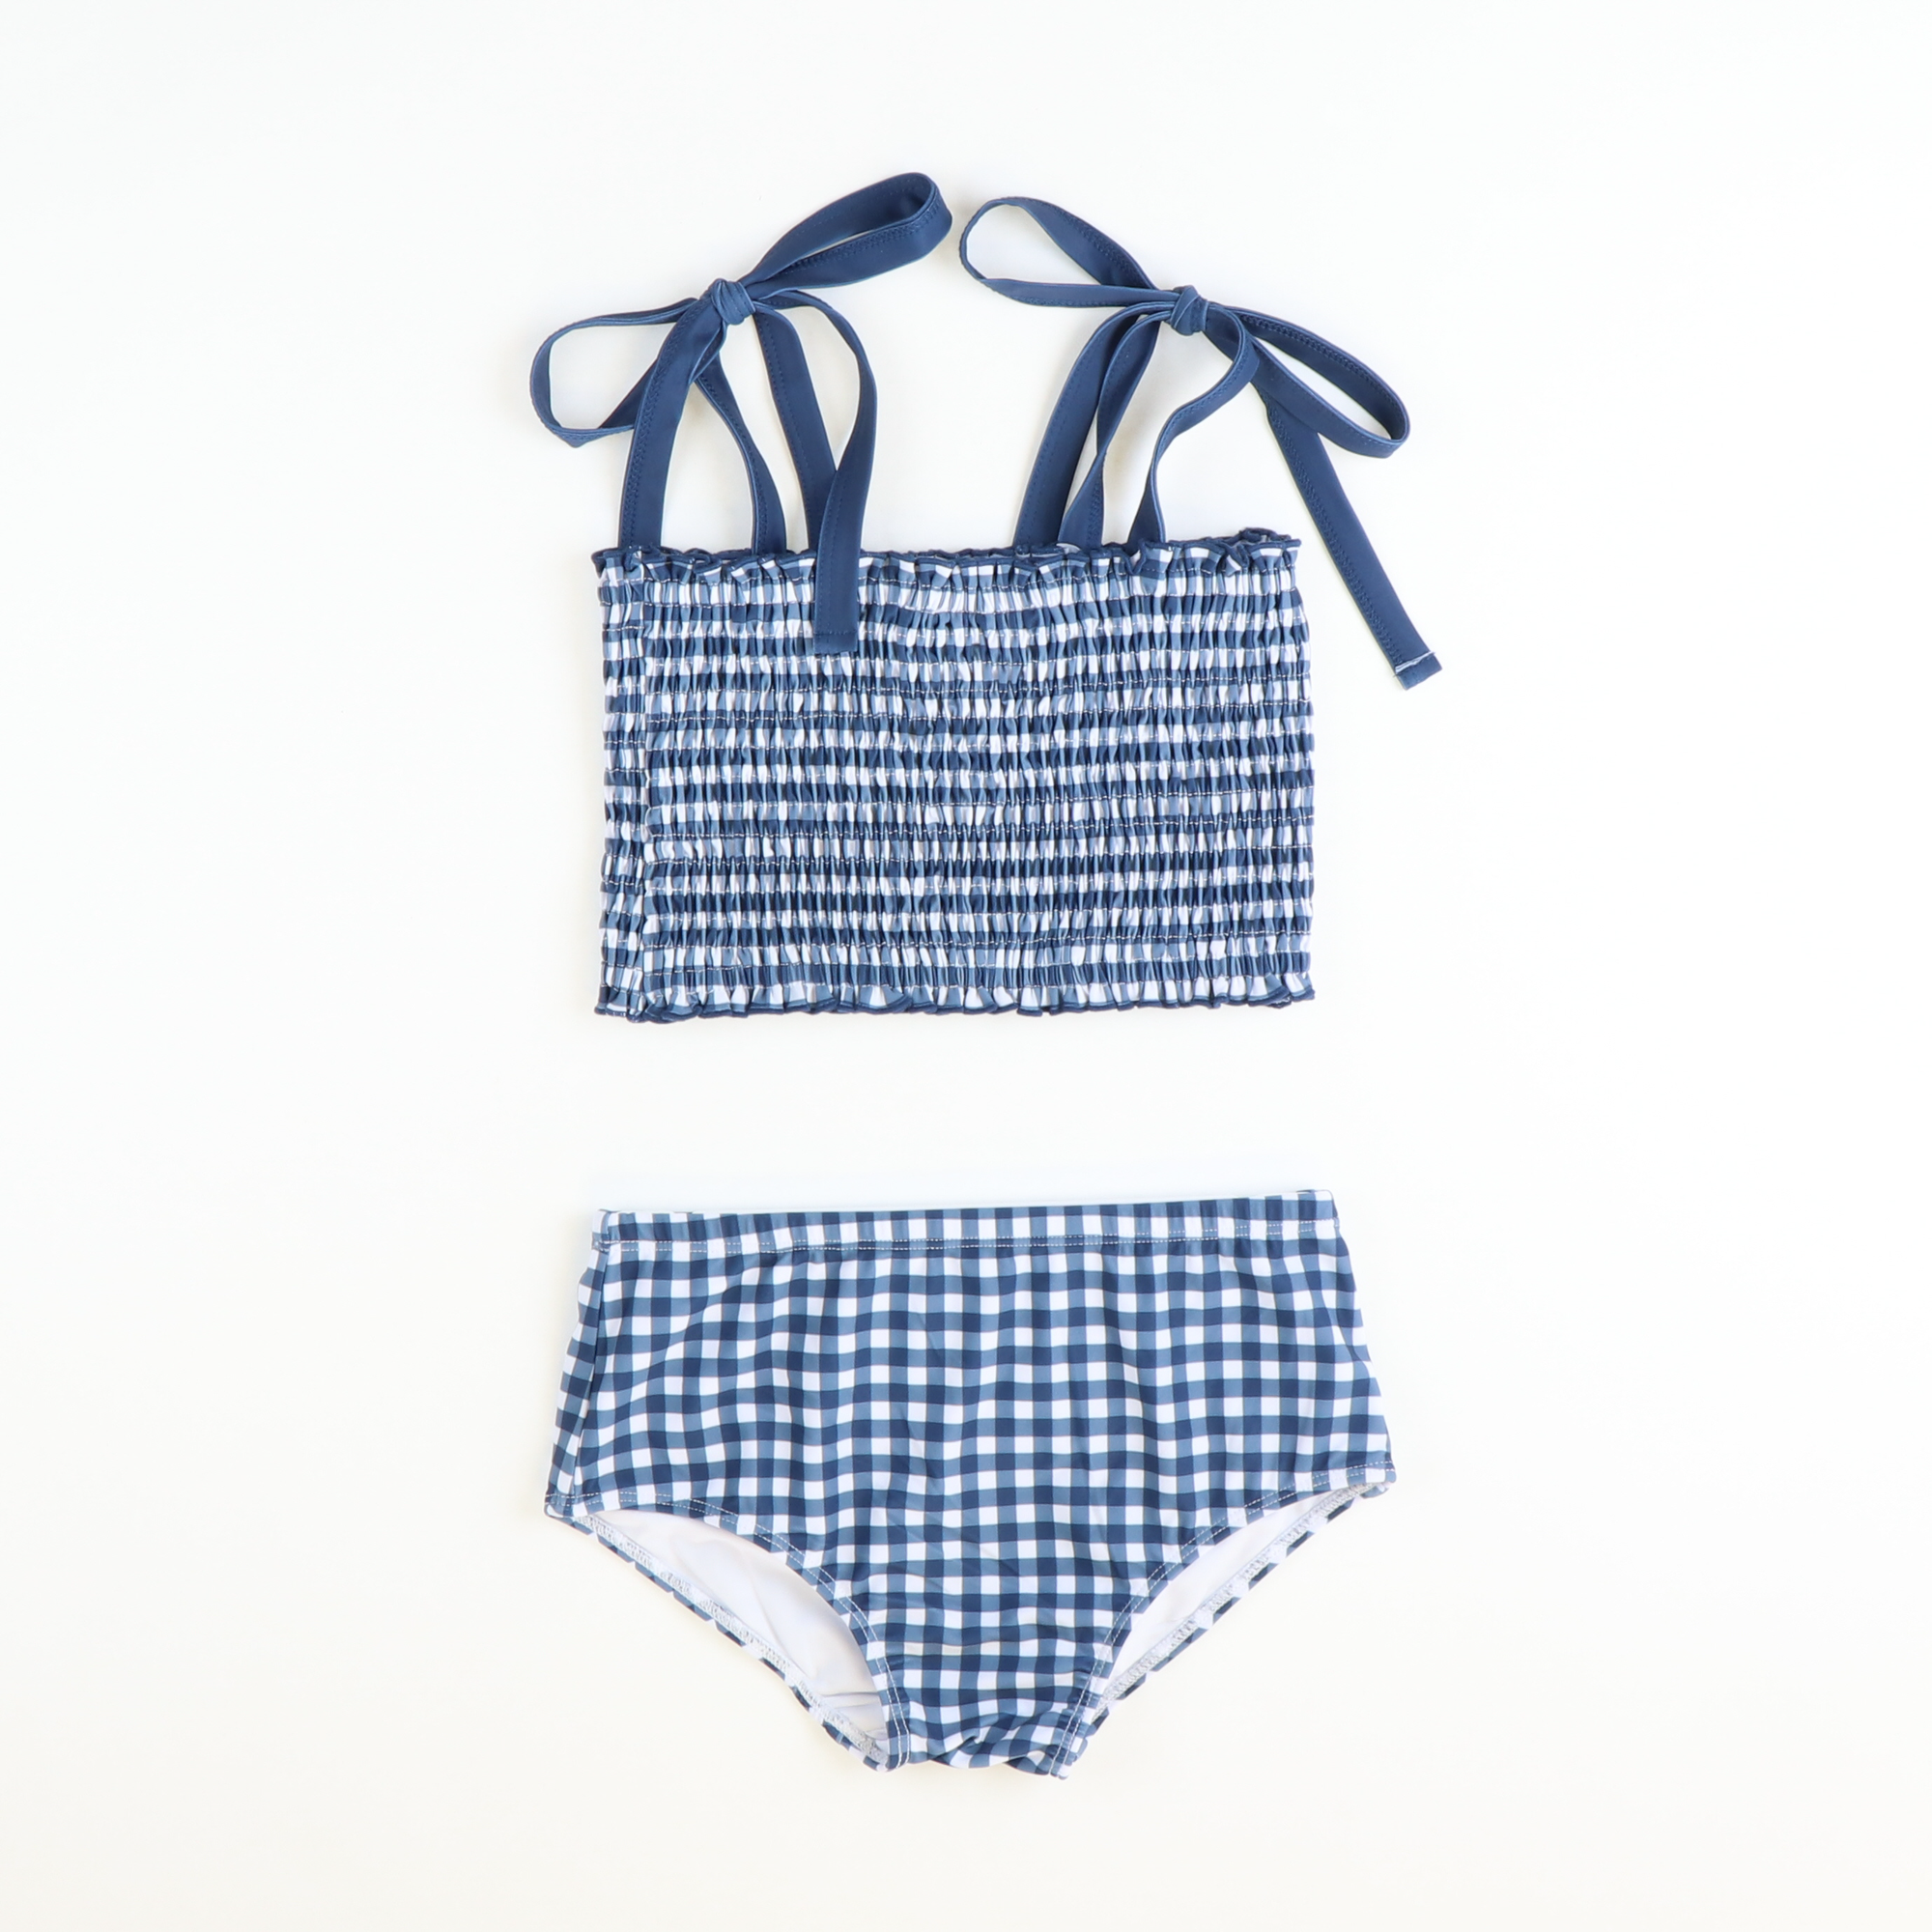 Two-Piece Swimsuit - Nautical Navy Check